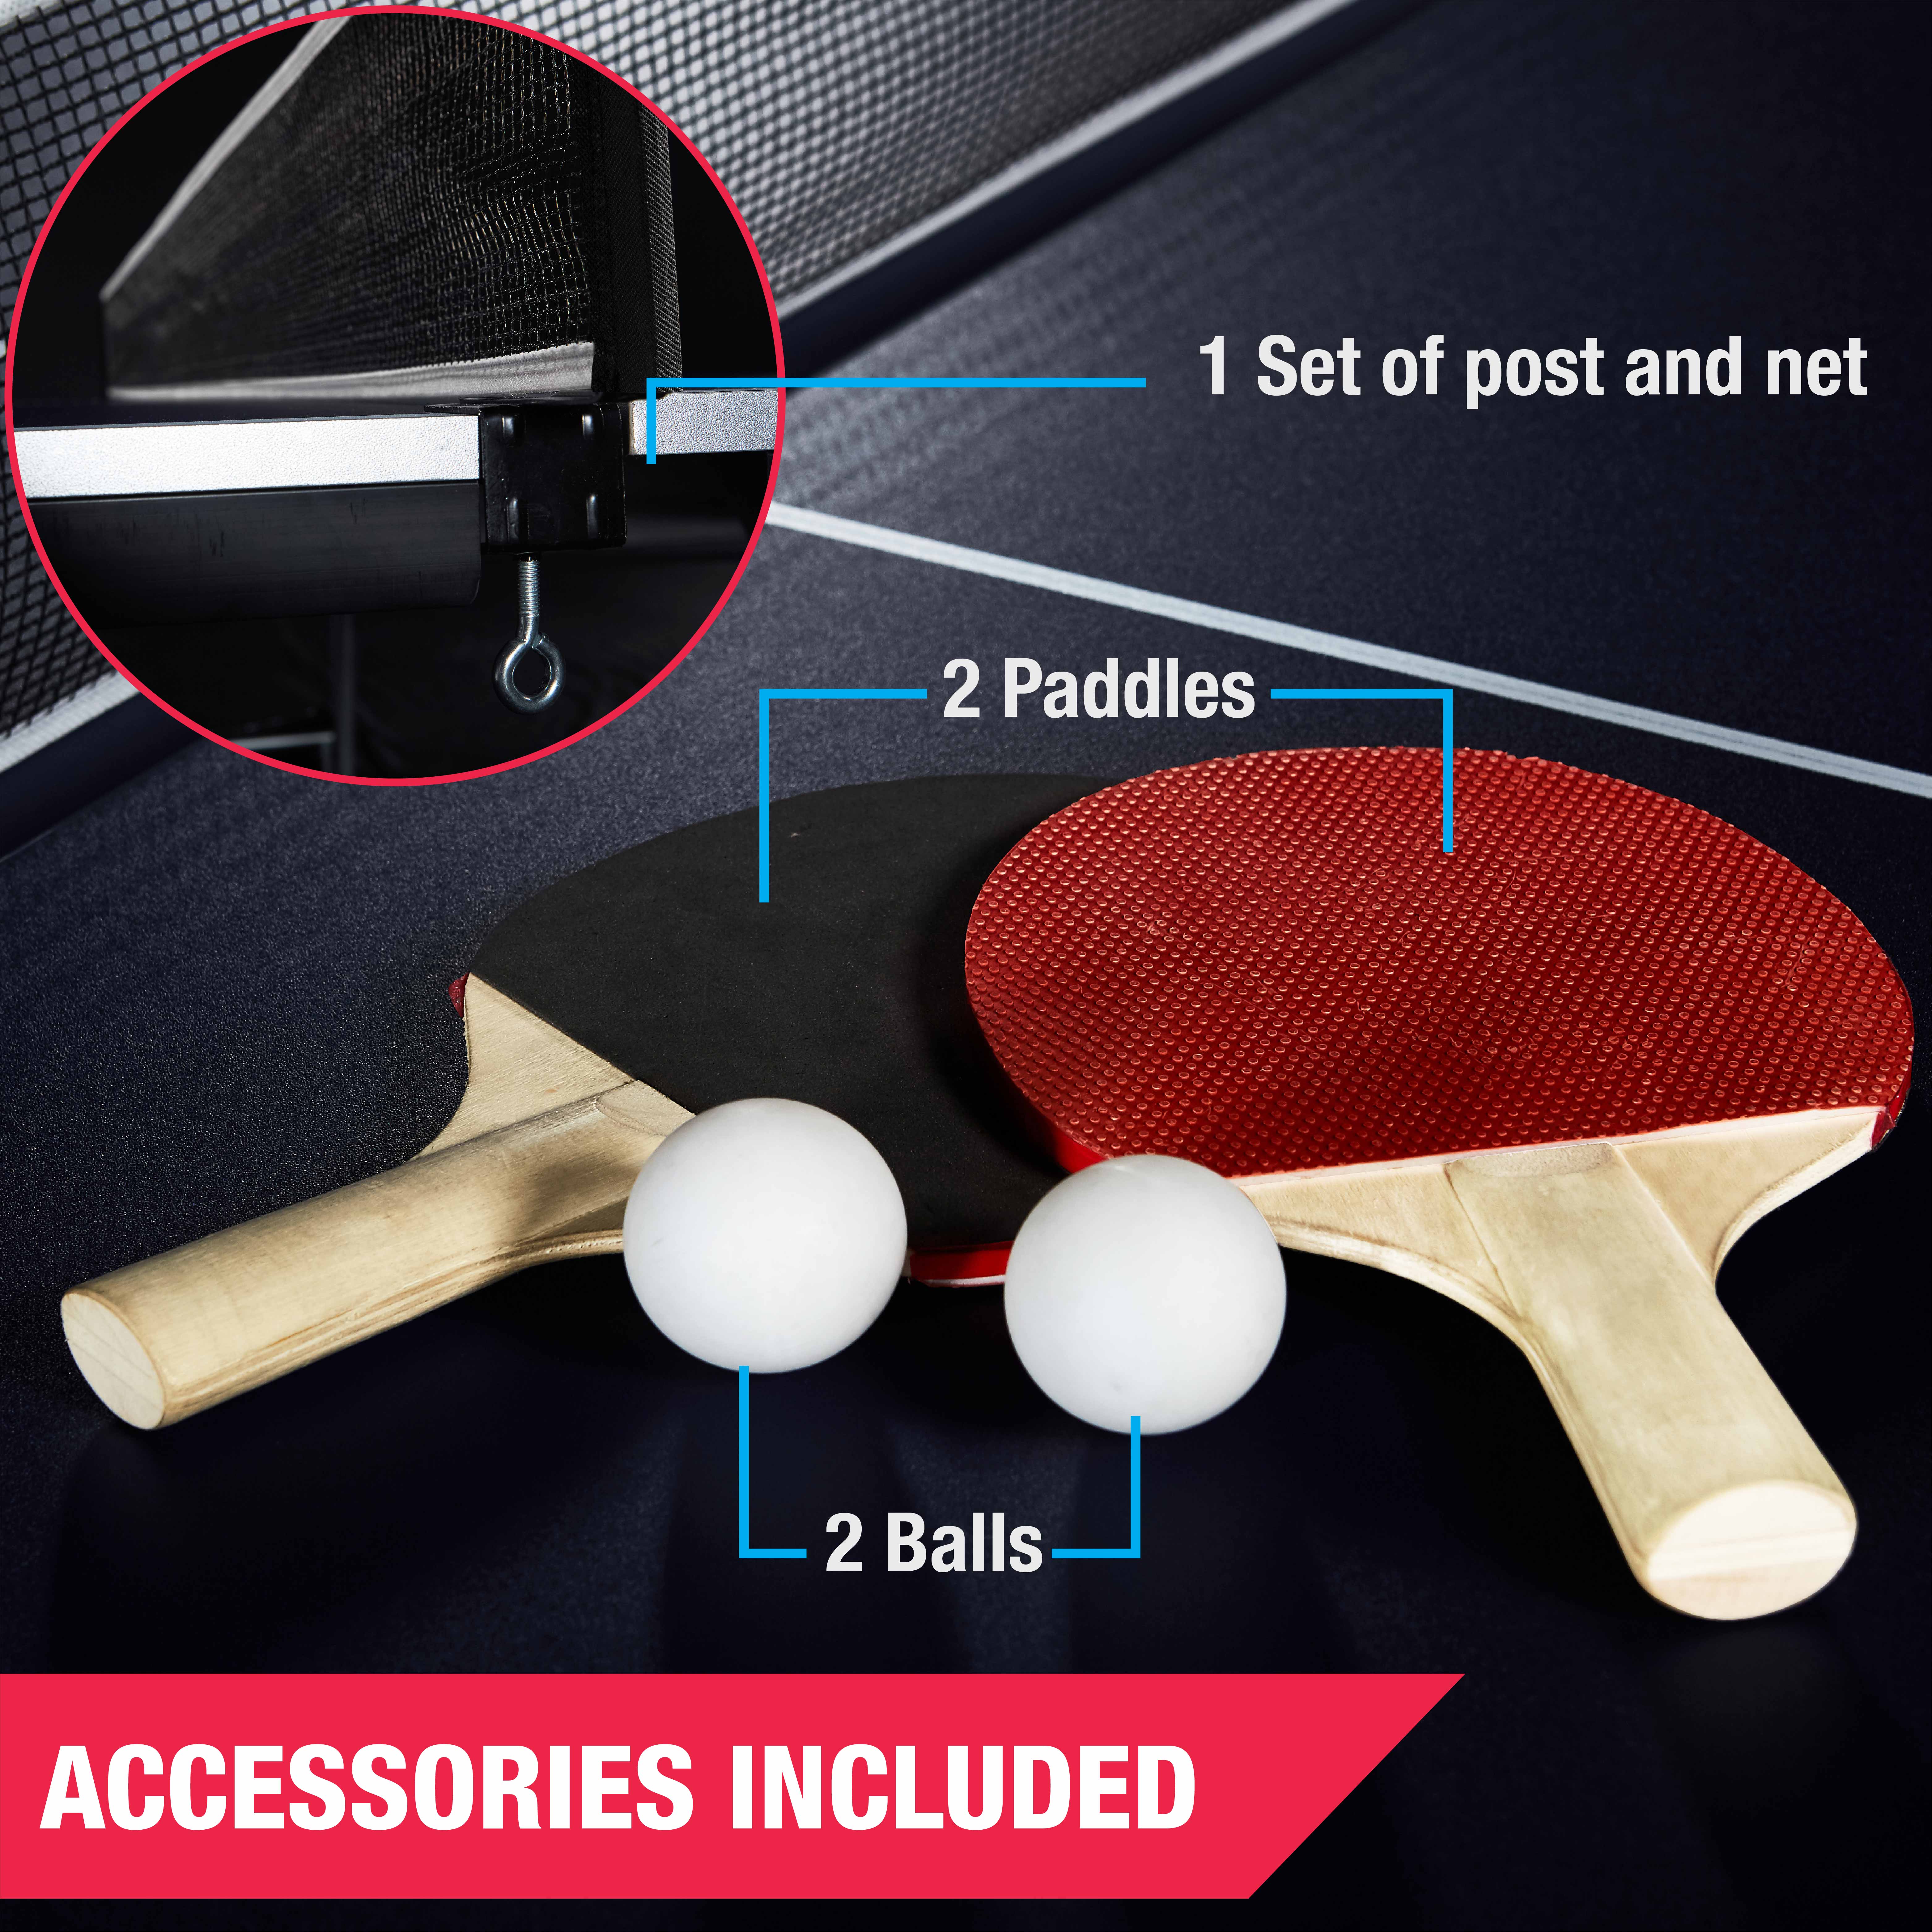 MD Sports Official Size 15 mm 4 Piece Indoor Table Tennis, Accessories Included - image 4 of 13